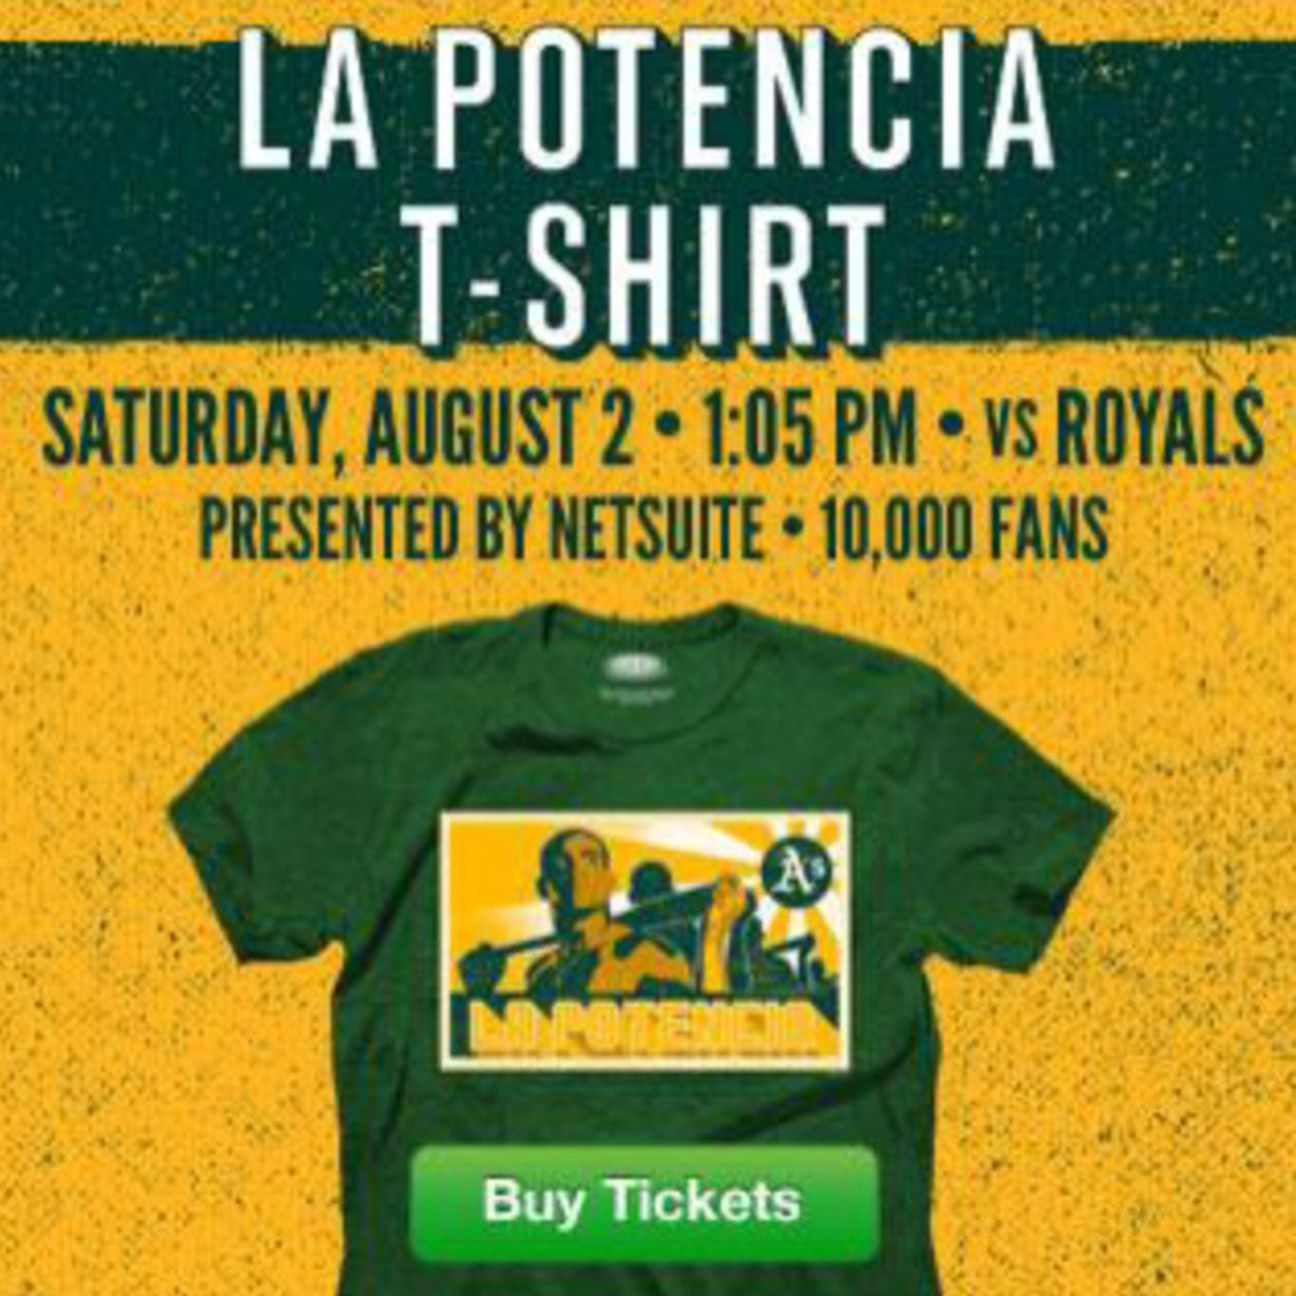 Oakland Athletics - Yoenis Cespedes “La Potencia” T-shirt giveaway still on  this Saturday. NEW GIVEAWAY August 7: 15,000 fans receive Josh Donaldson  Tees + $10 Field Level tickets. While supplies last. Great